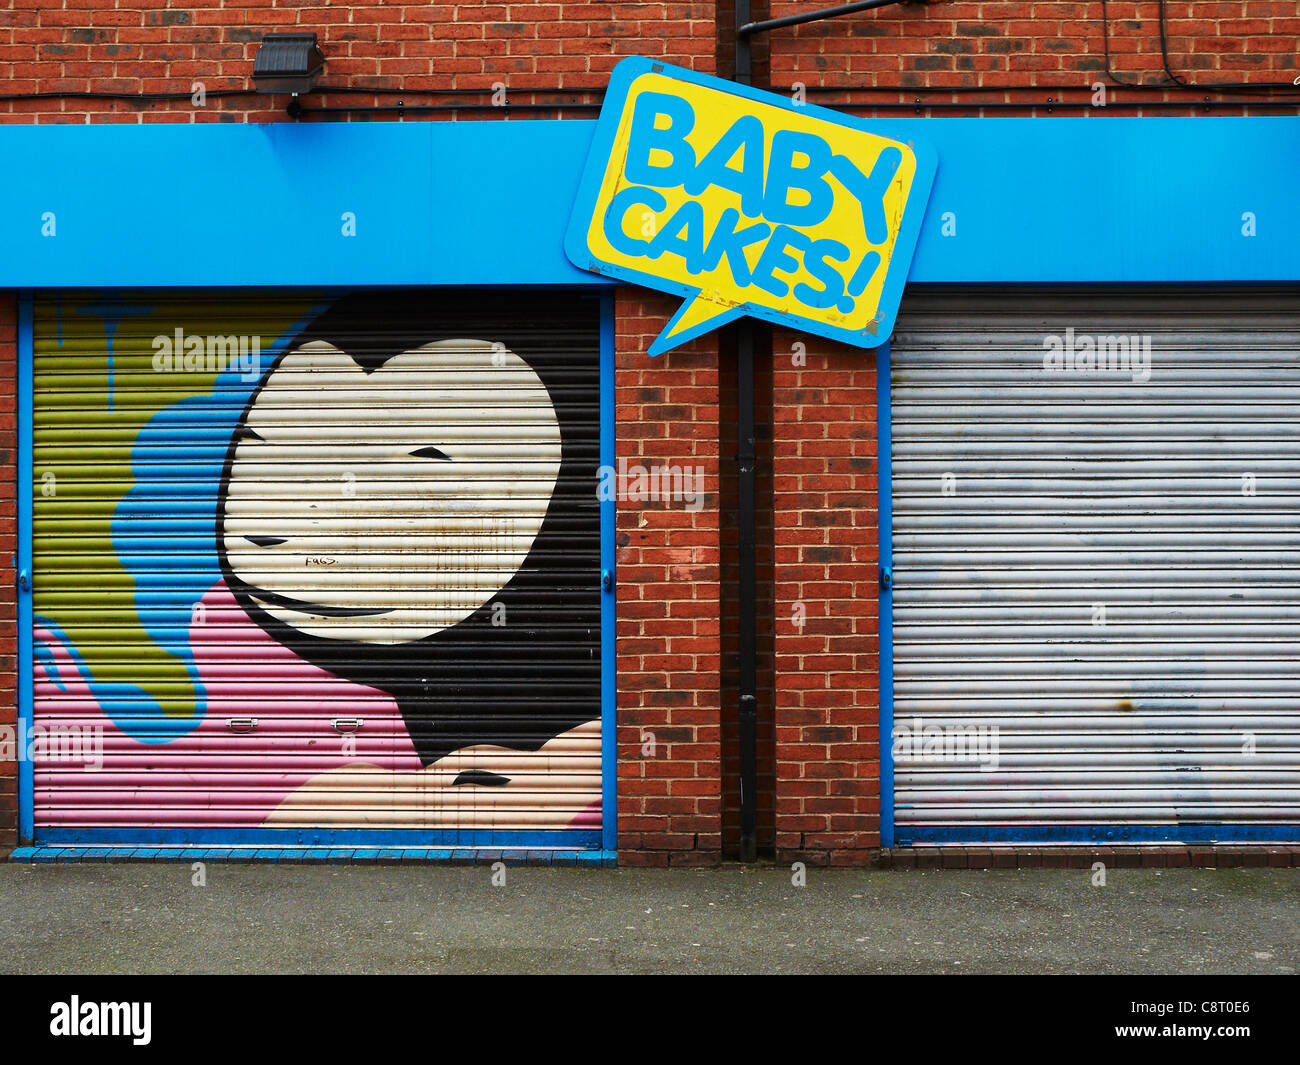 Baby cakes ad on shutter in Northern Quarter Manchester UK Stock Photo